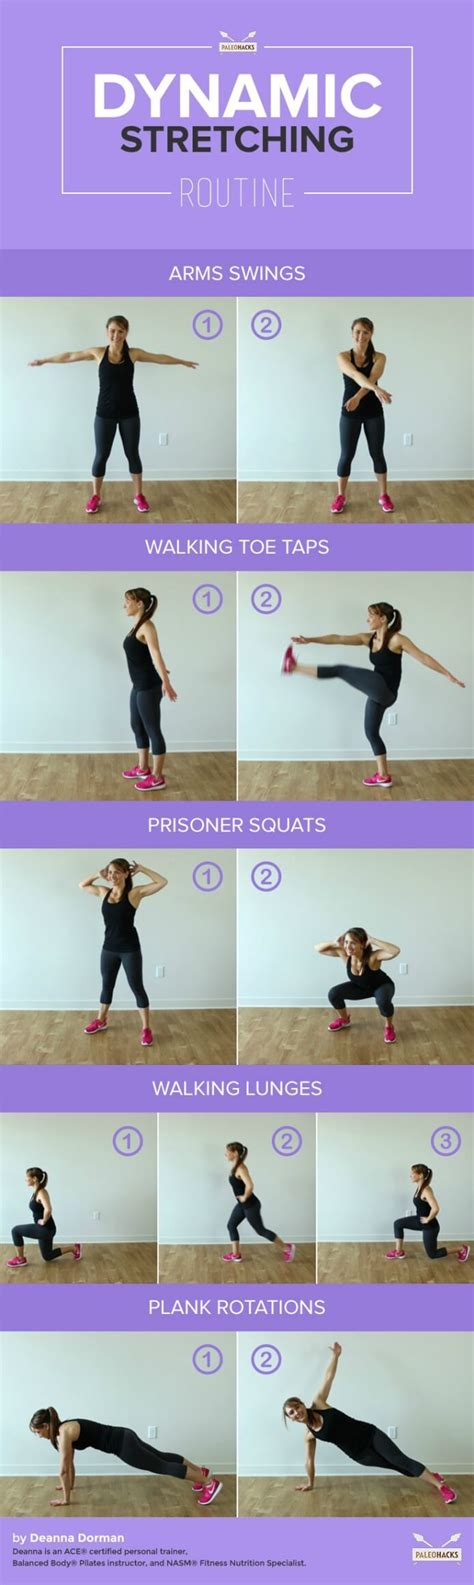 A Dynamic Stretching Routine You Can Do In Under 5 Minutes Fitness